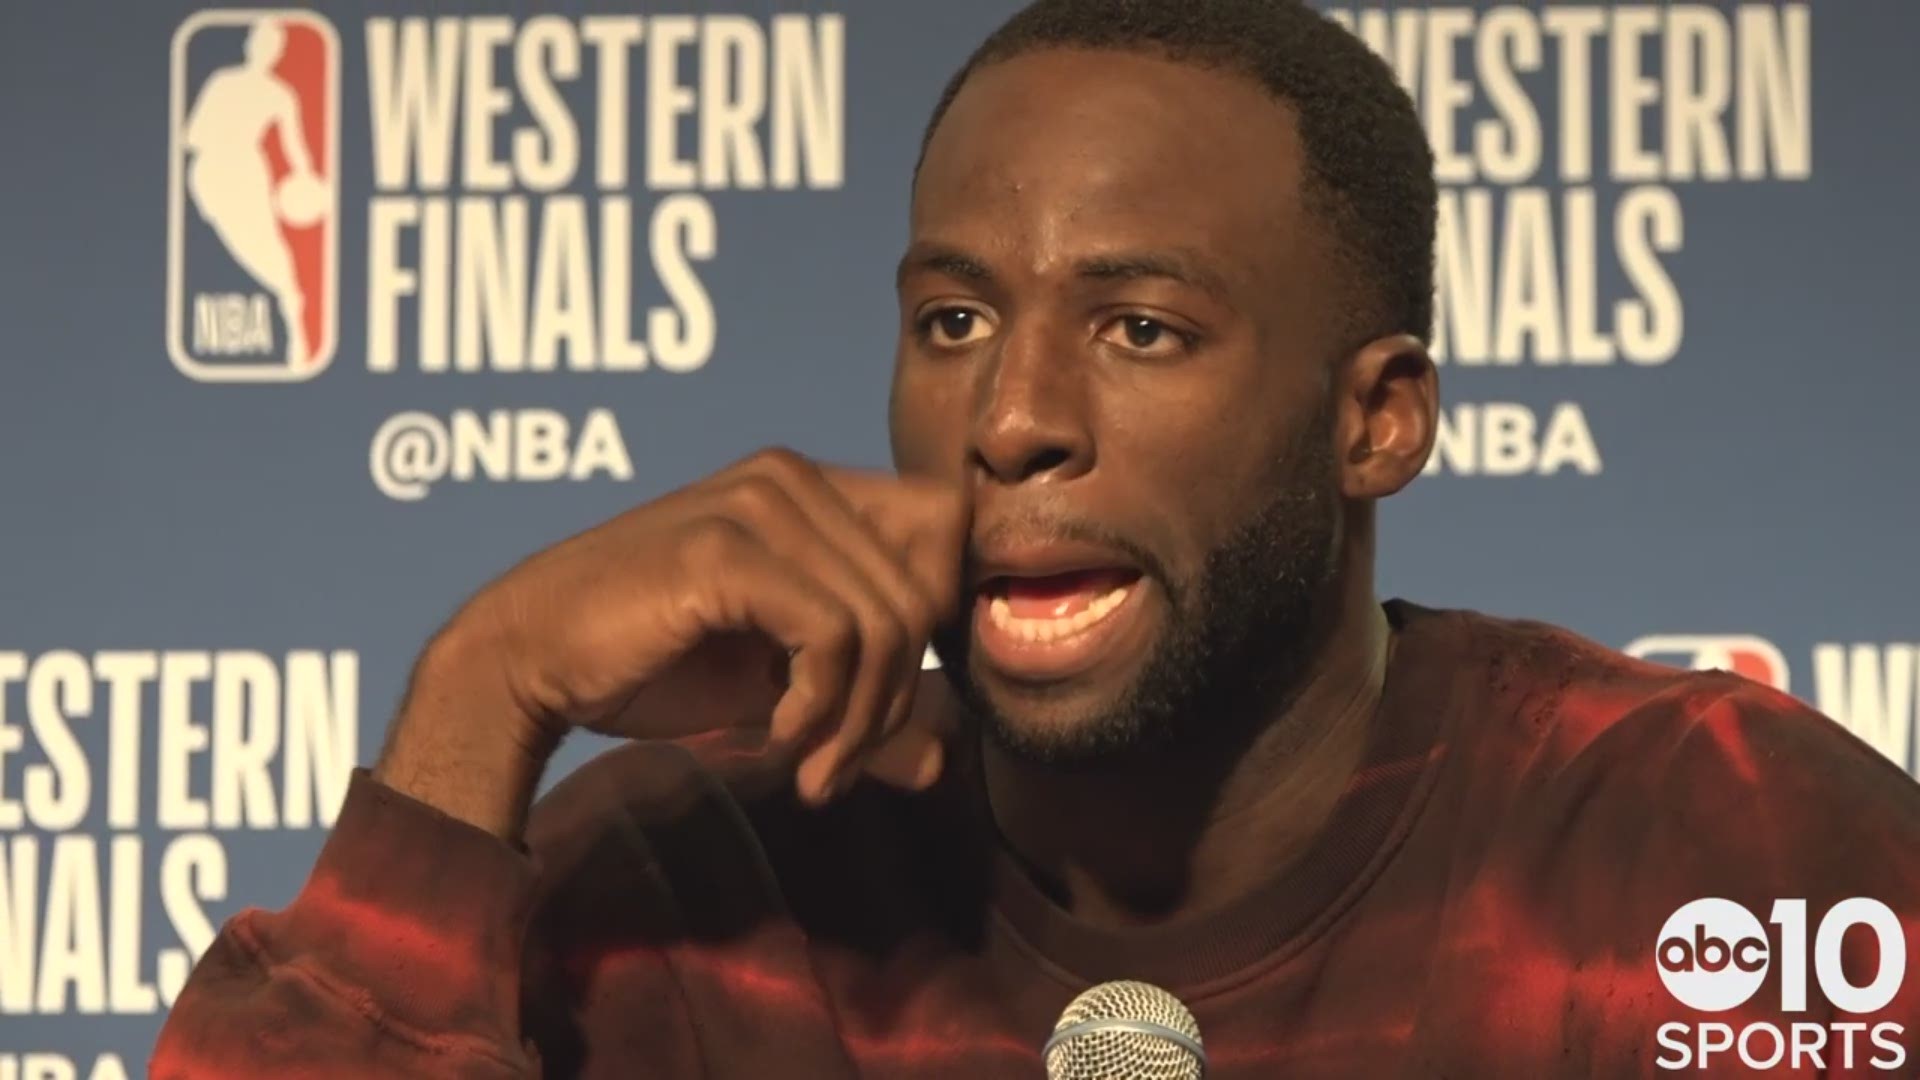 Warriors forward Draymond Green talks about Tuesday’s 116-94 victory in Game 1 of the Western Conference Finals over the Trail Blazers, not expecting another poor shooting night from Portland in Game 2, going deep into the bench of Golden State and the 36-point performance from his teammate Stephen Curry.